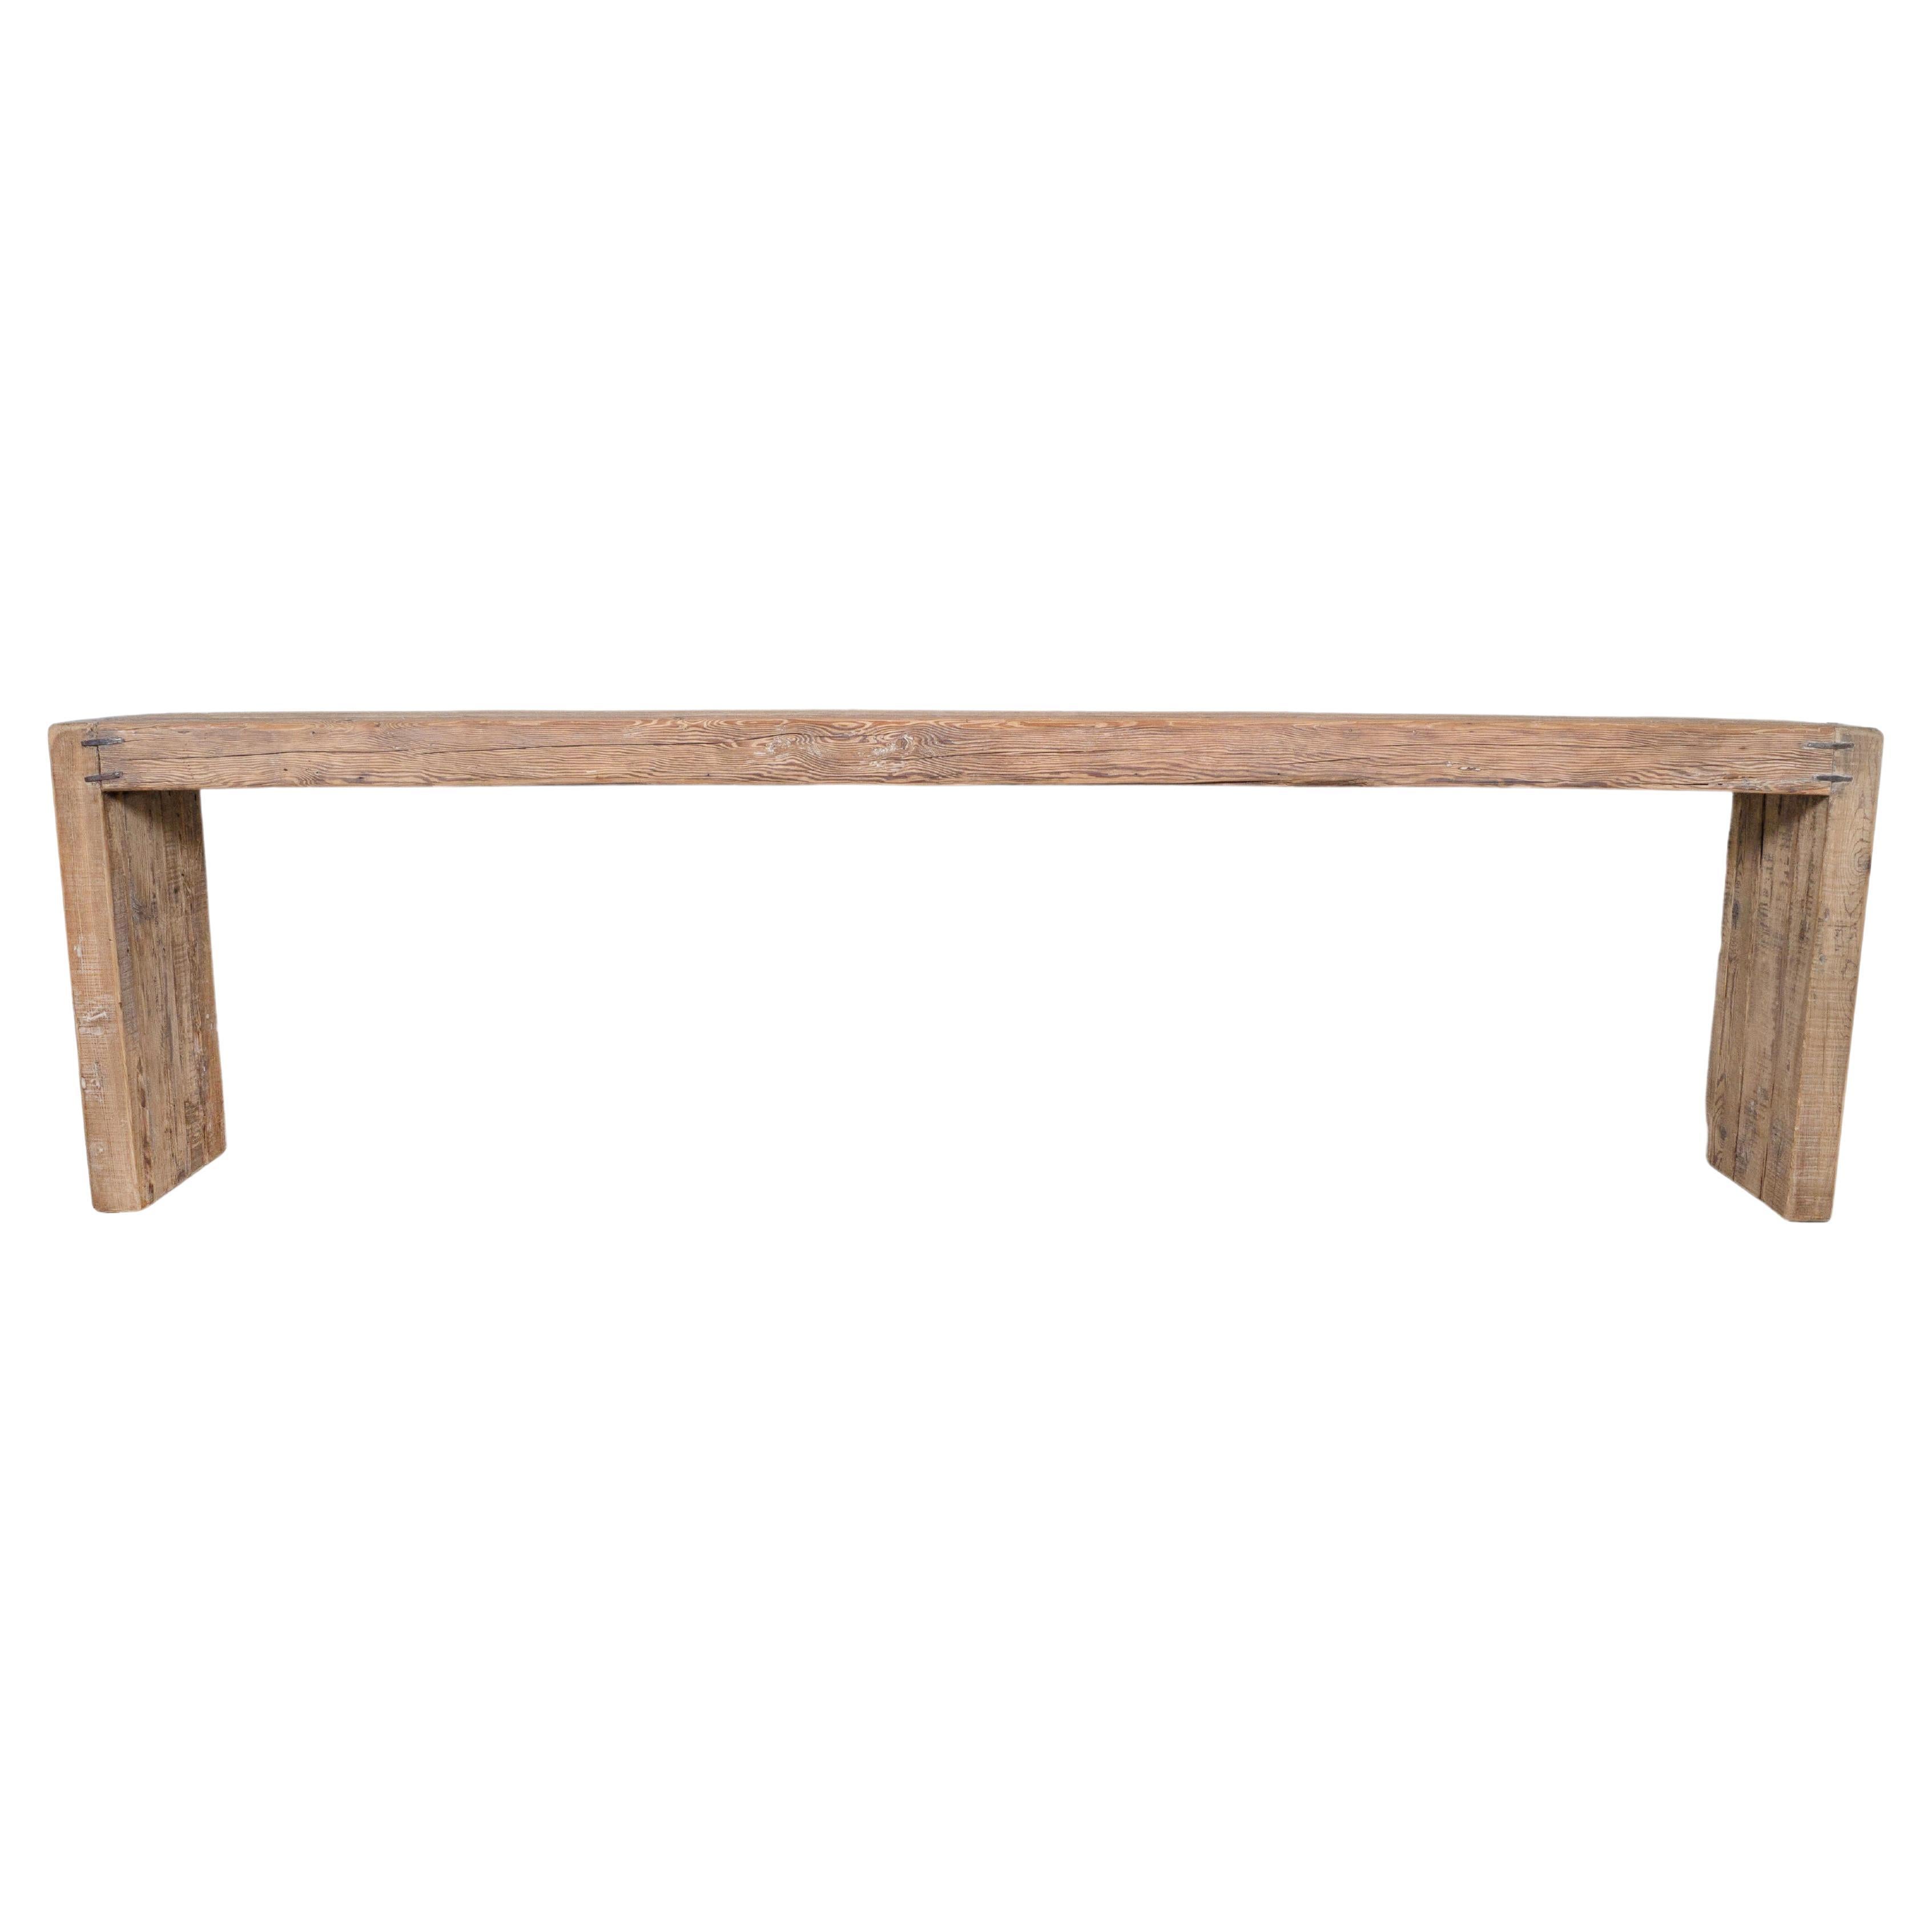 Minimalist Provincial Serving Table in Reclaimed Elm